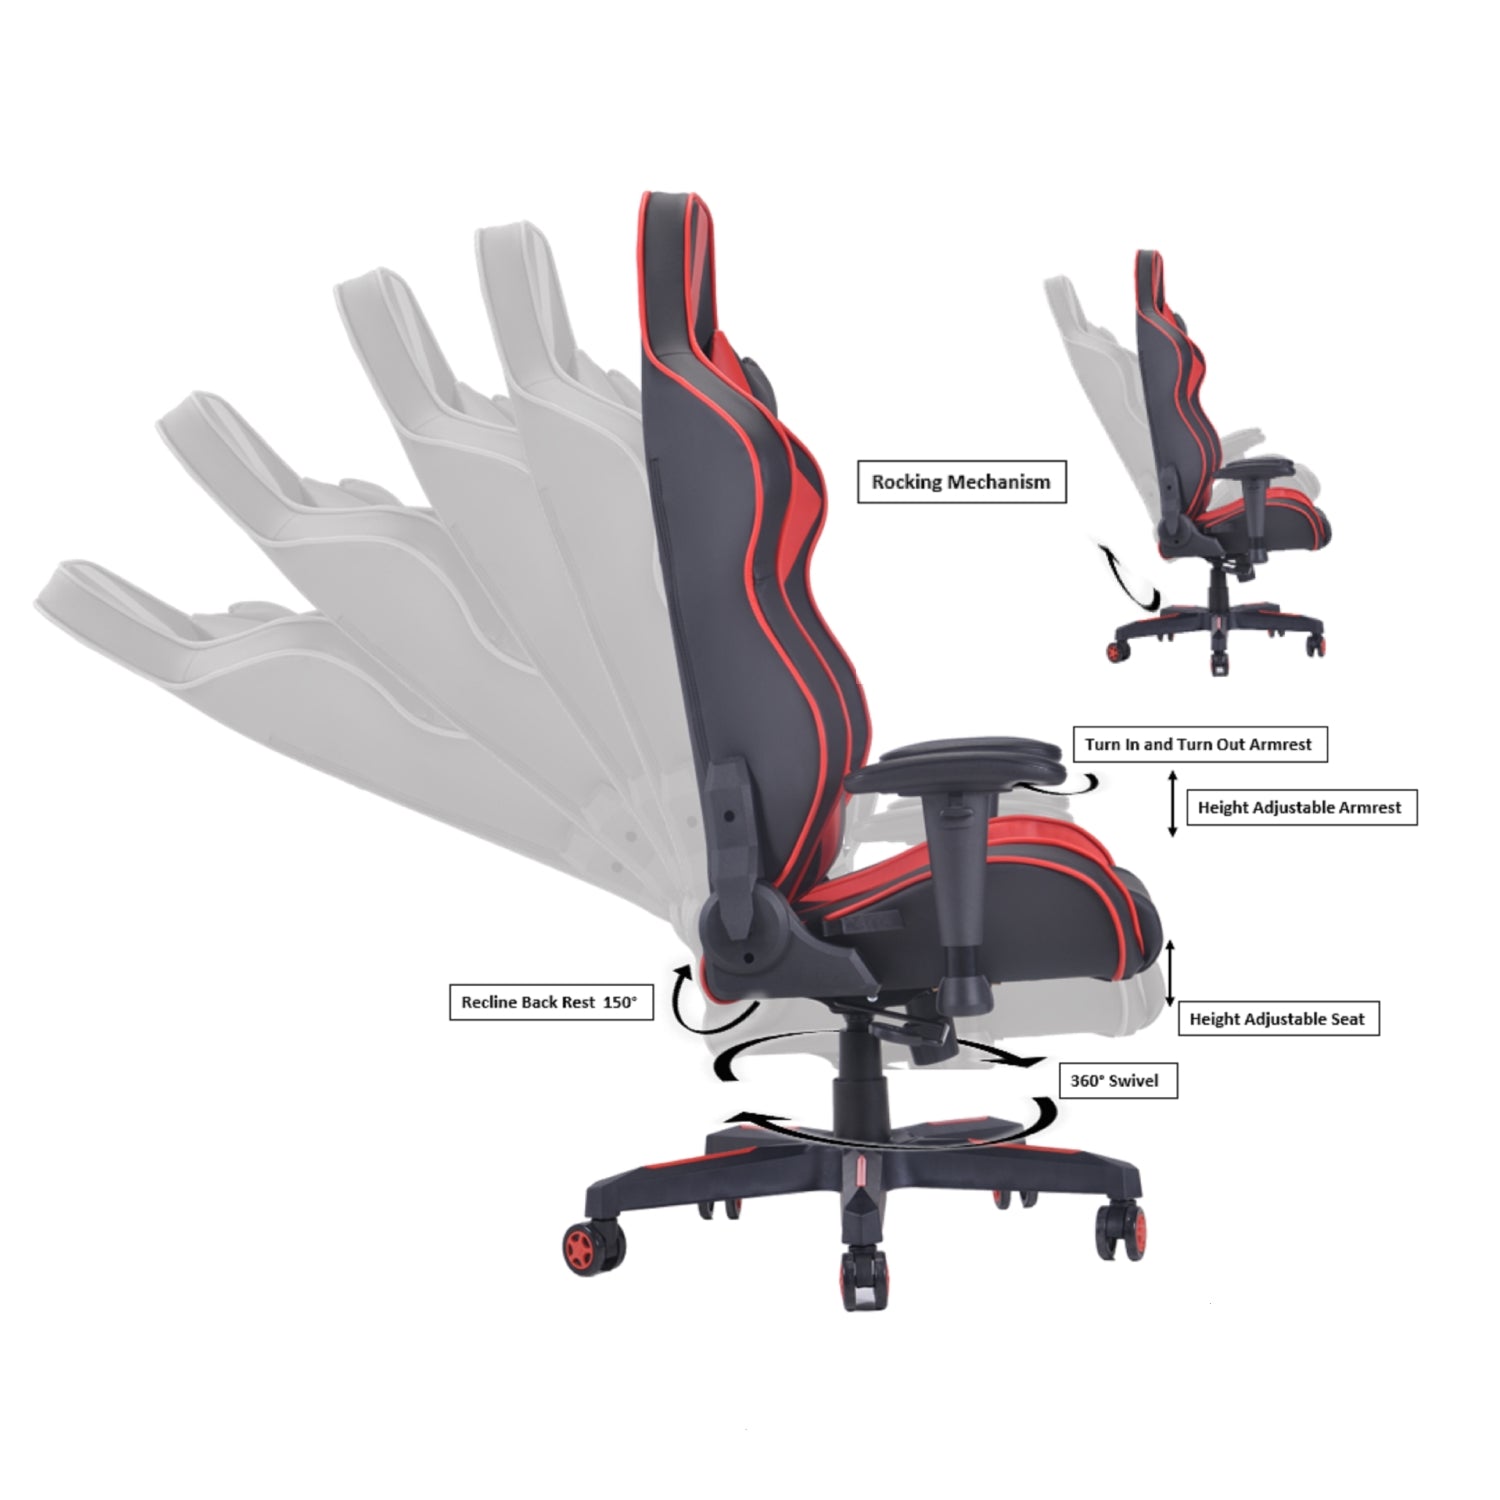 ViscoLogic METALLIC PRO Ergonomic Reclining Swivel Sports Style Home Office Computer Gaming Chair (Black & Red)